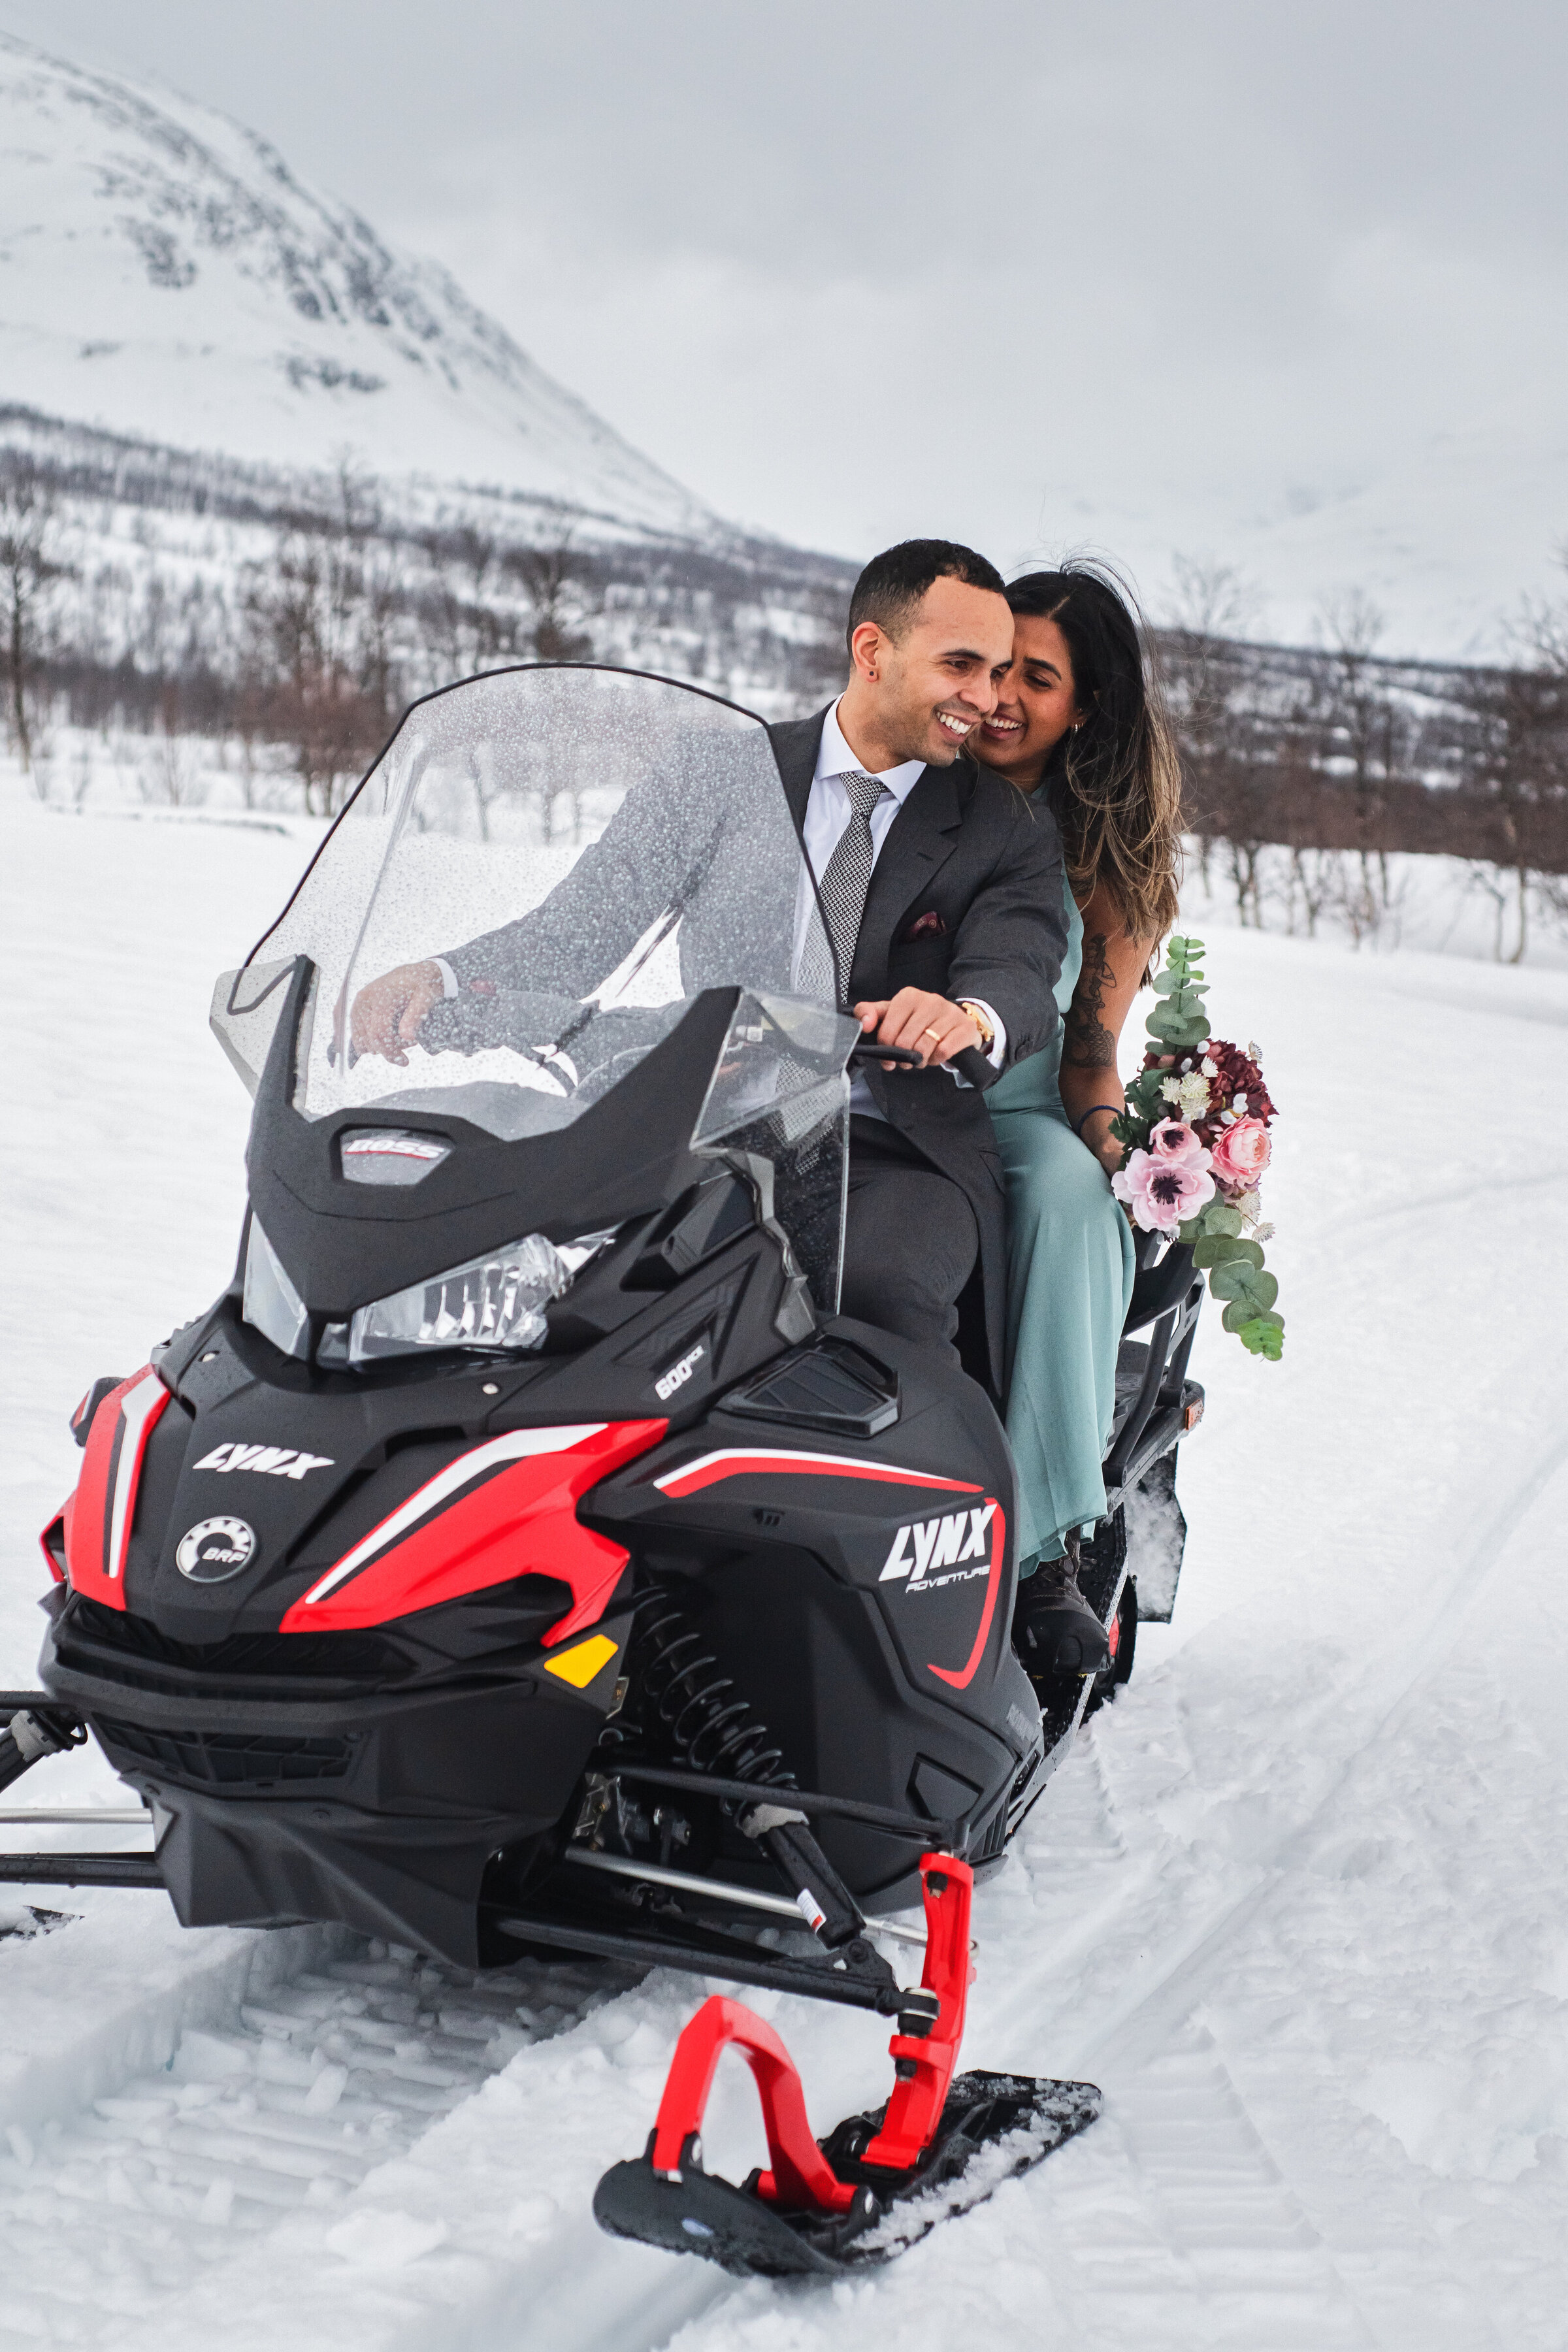 A newly eloped Indian couple sharing a private snowmobile trip, smiling at each other on a snowmobile, with the groom in a suit and the bride in a teal dress, set against a snowy Norwegian mountain landscape. The groom is driving and the bride riding passenger behind carrying a bouquet of flowers.